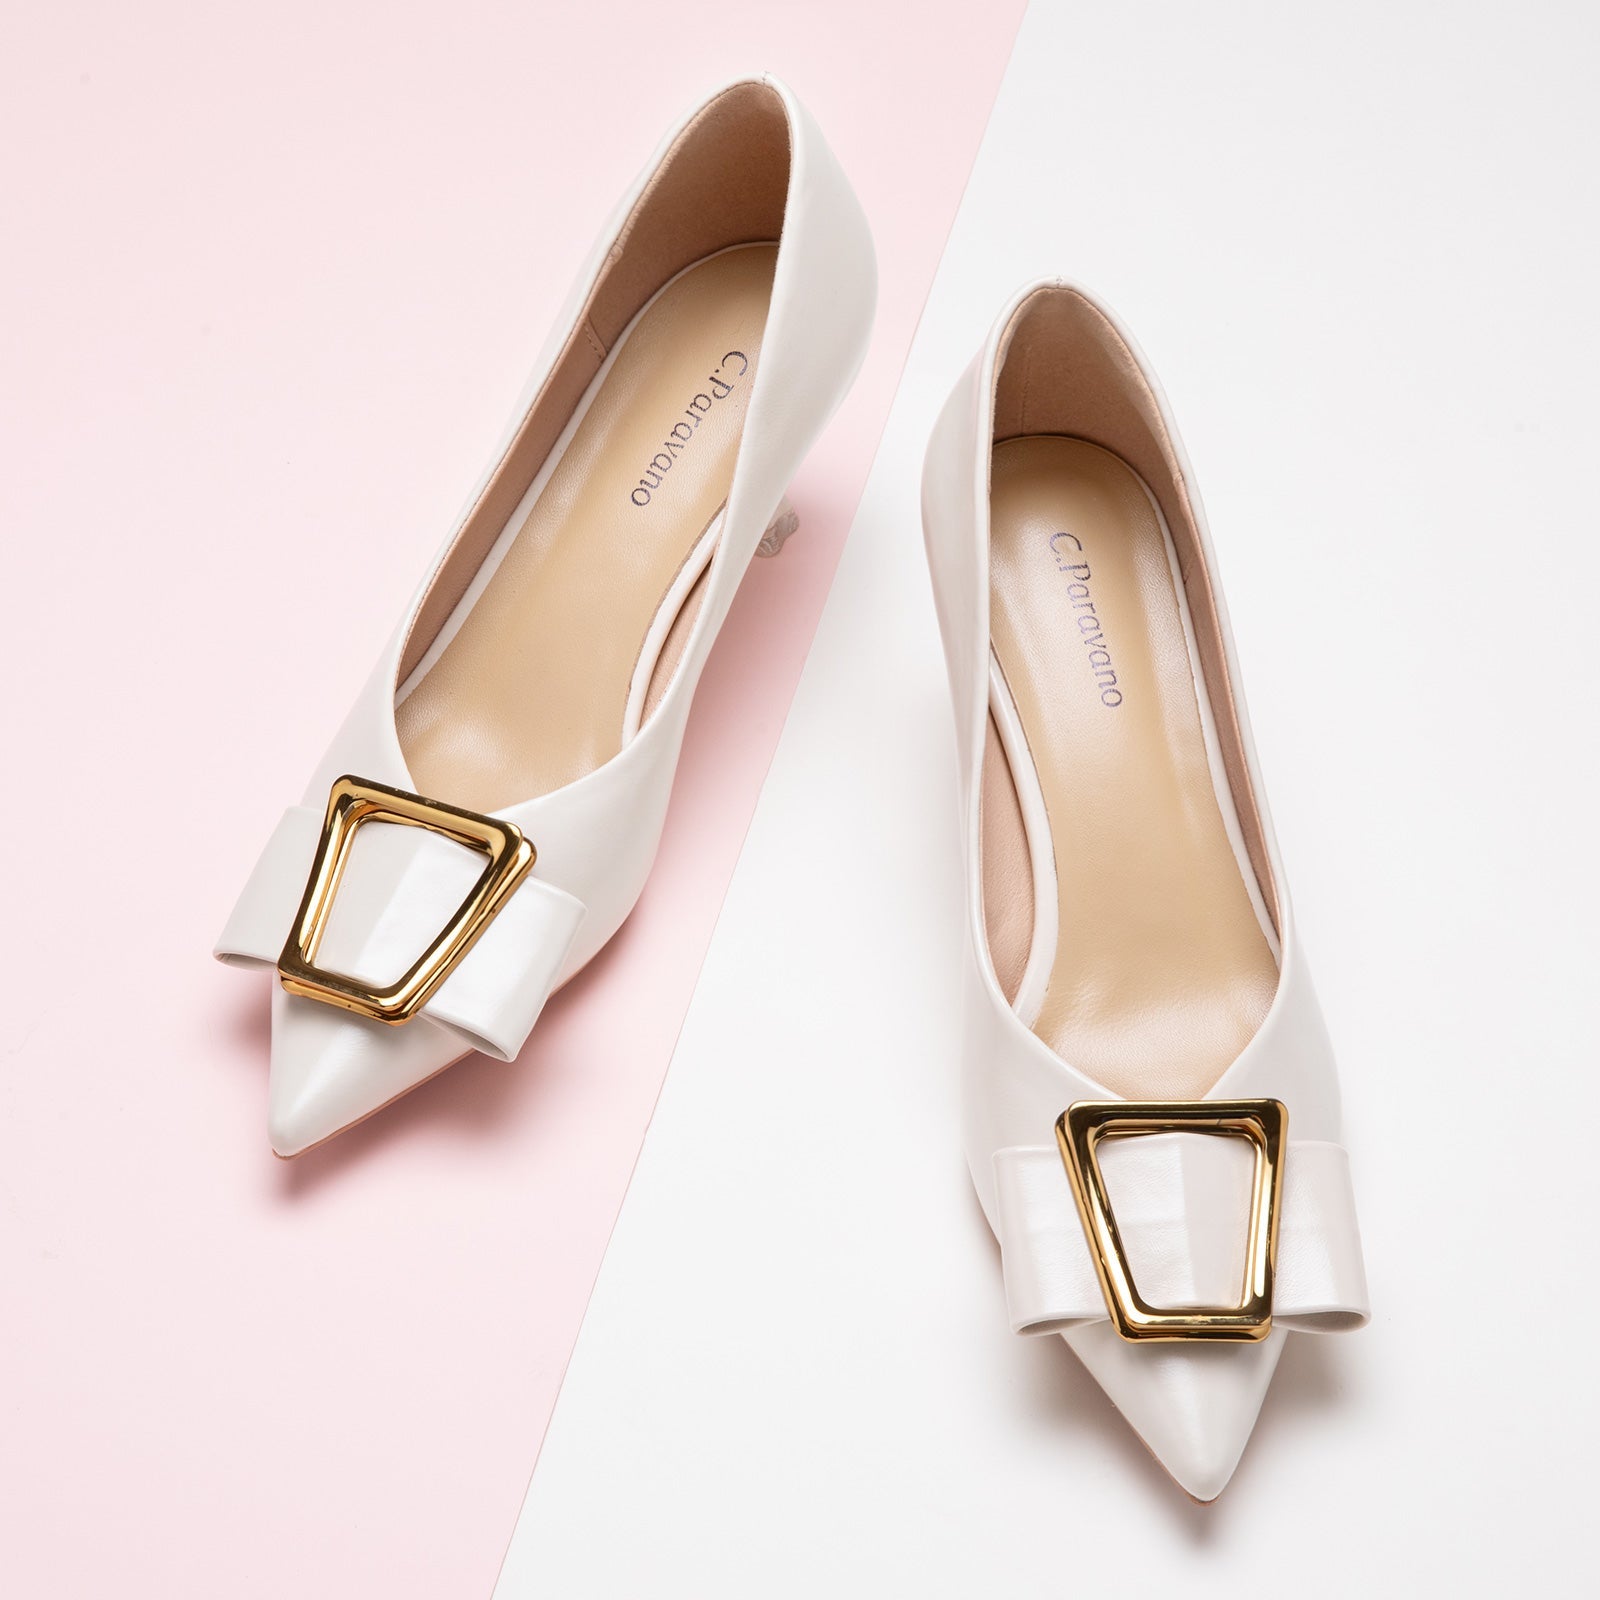 Geometric White Kitten Heel Pumps, featuring intricate patterns for a polished and sophisticated style